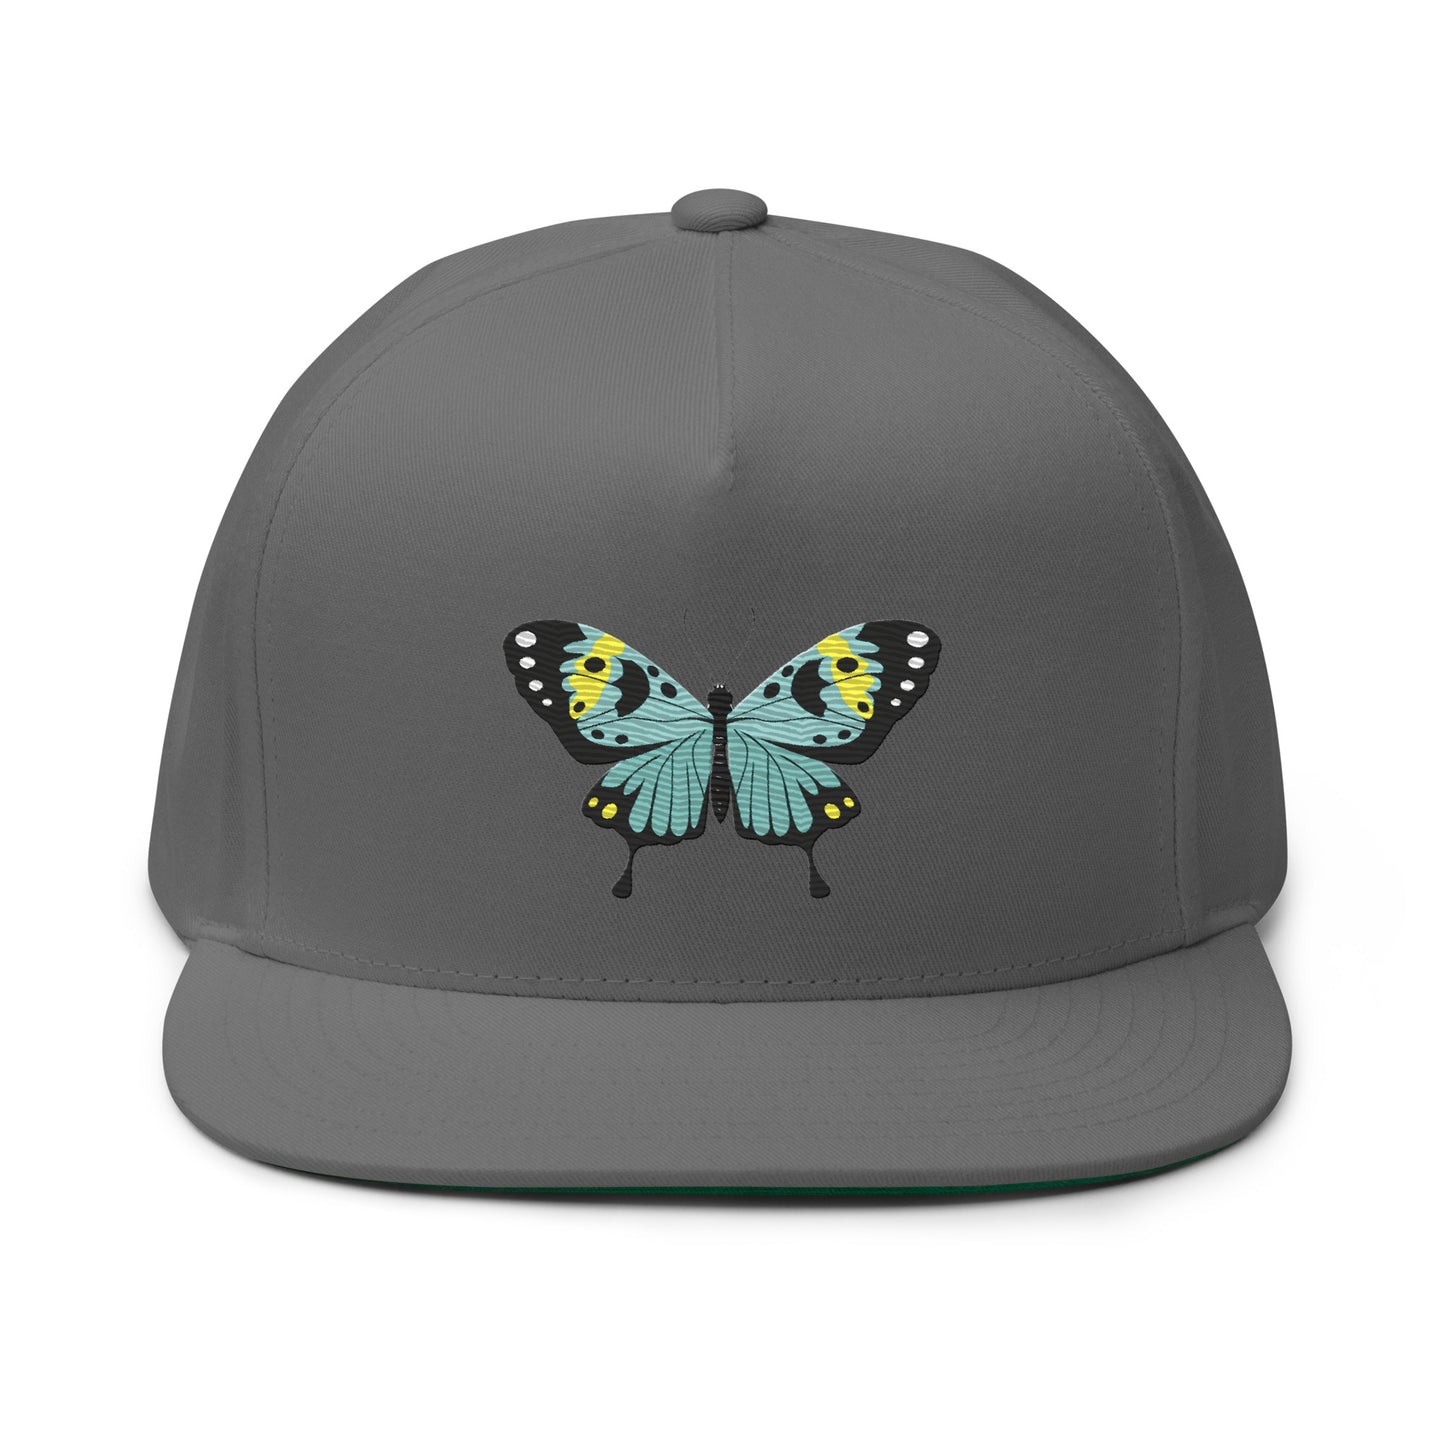 Flat Bill Cap embroidered with a butterfly